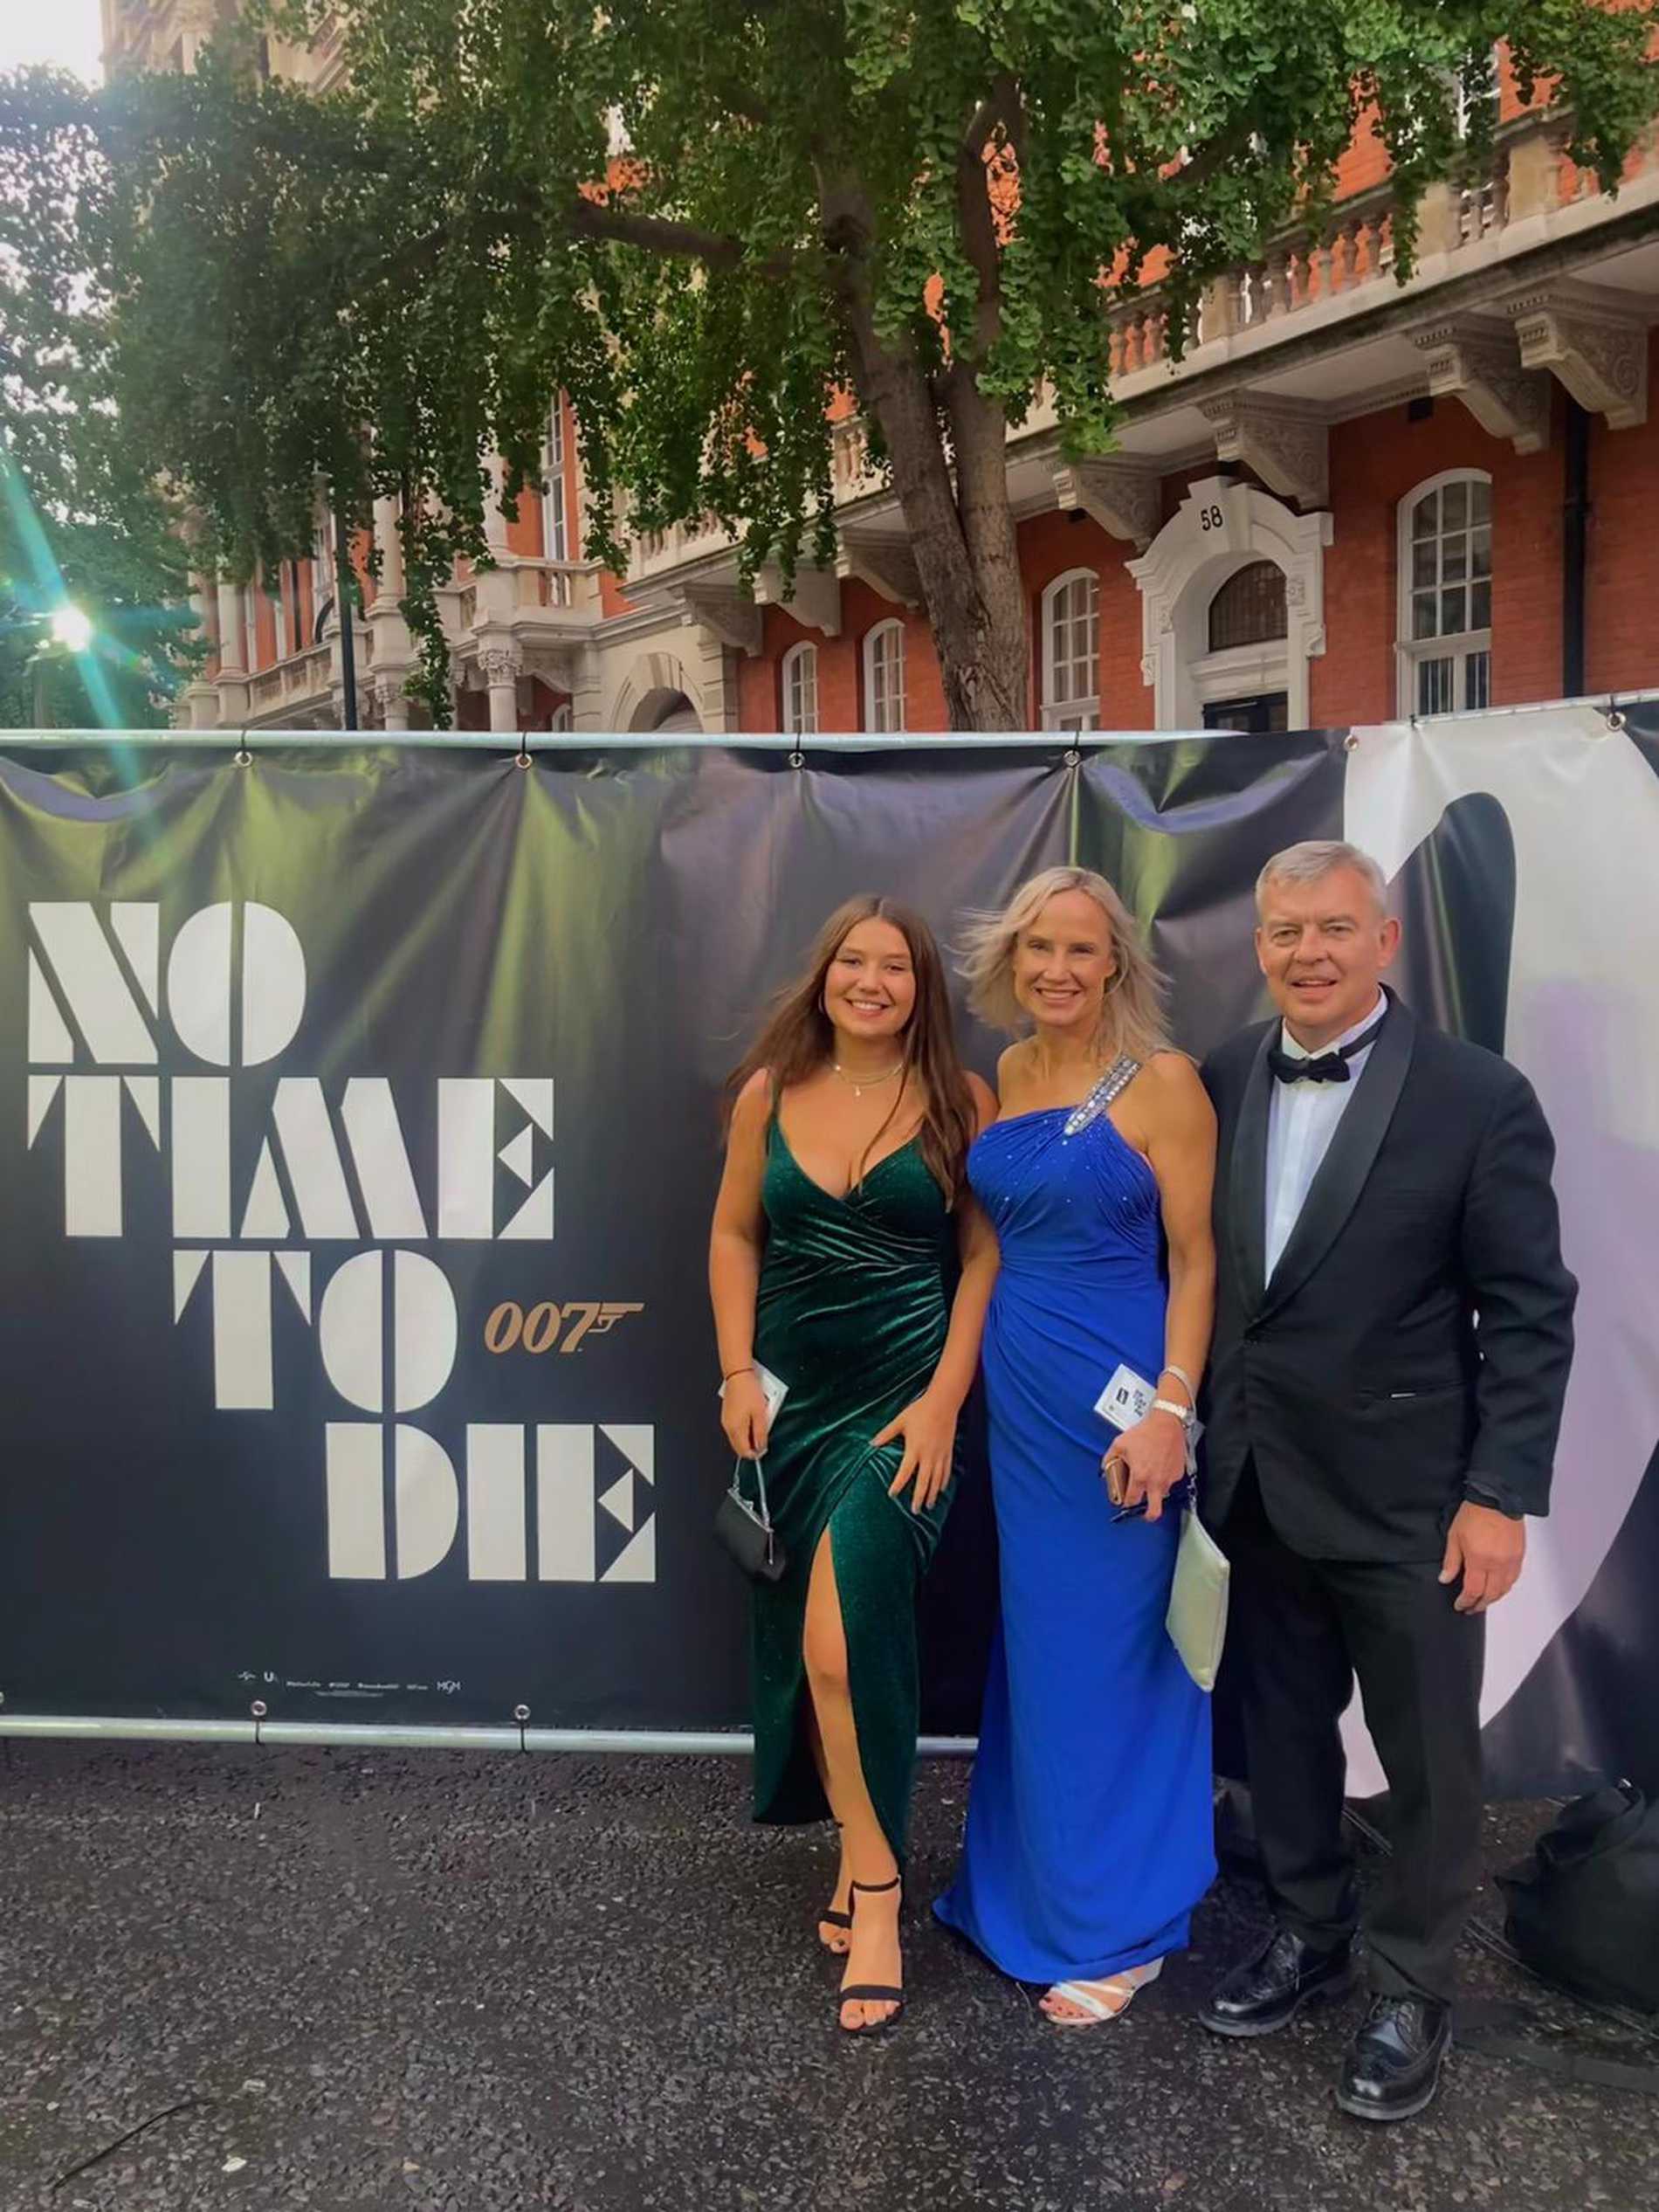 Chloe and her parents posing next to a 'No time to die' banner.